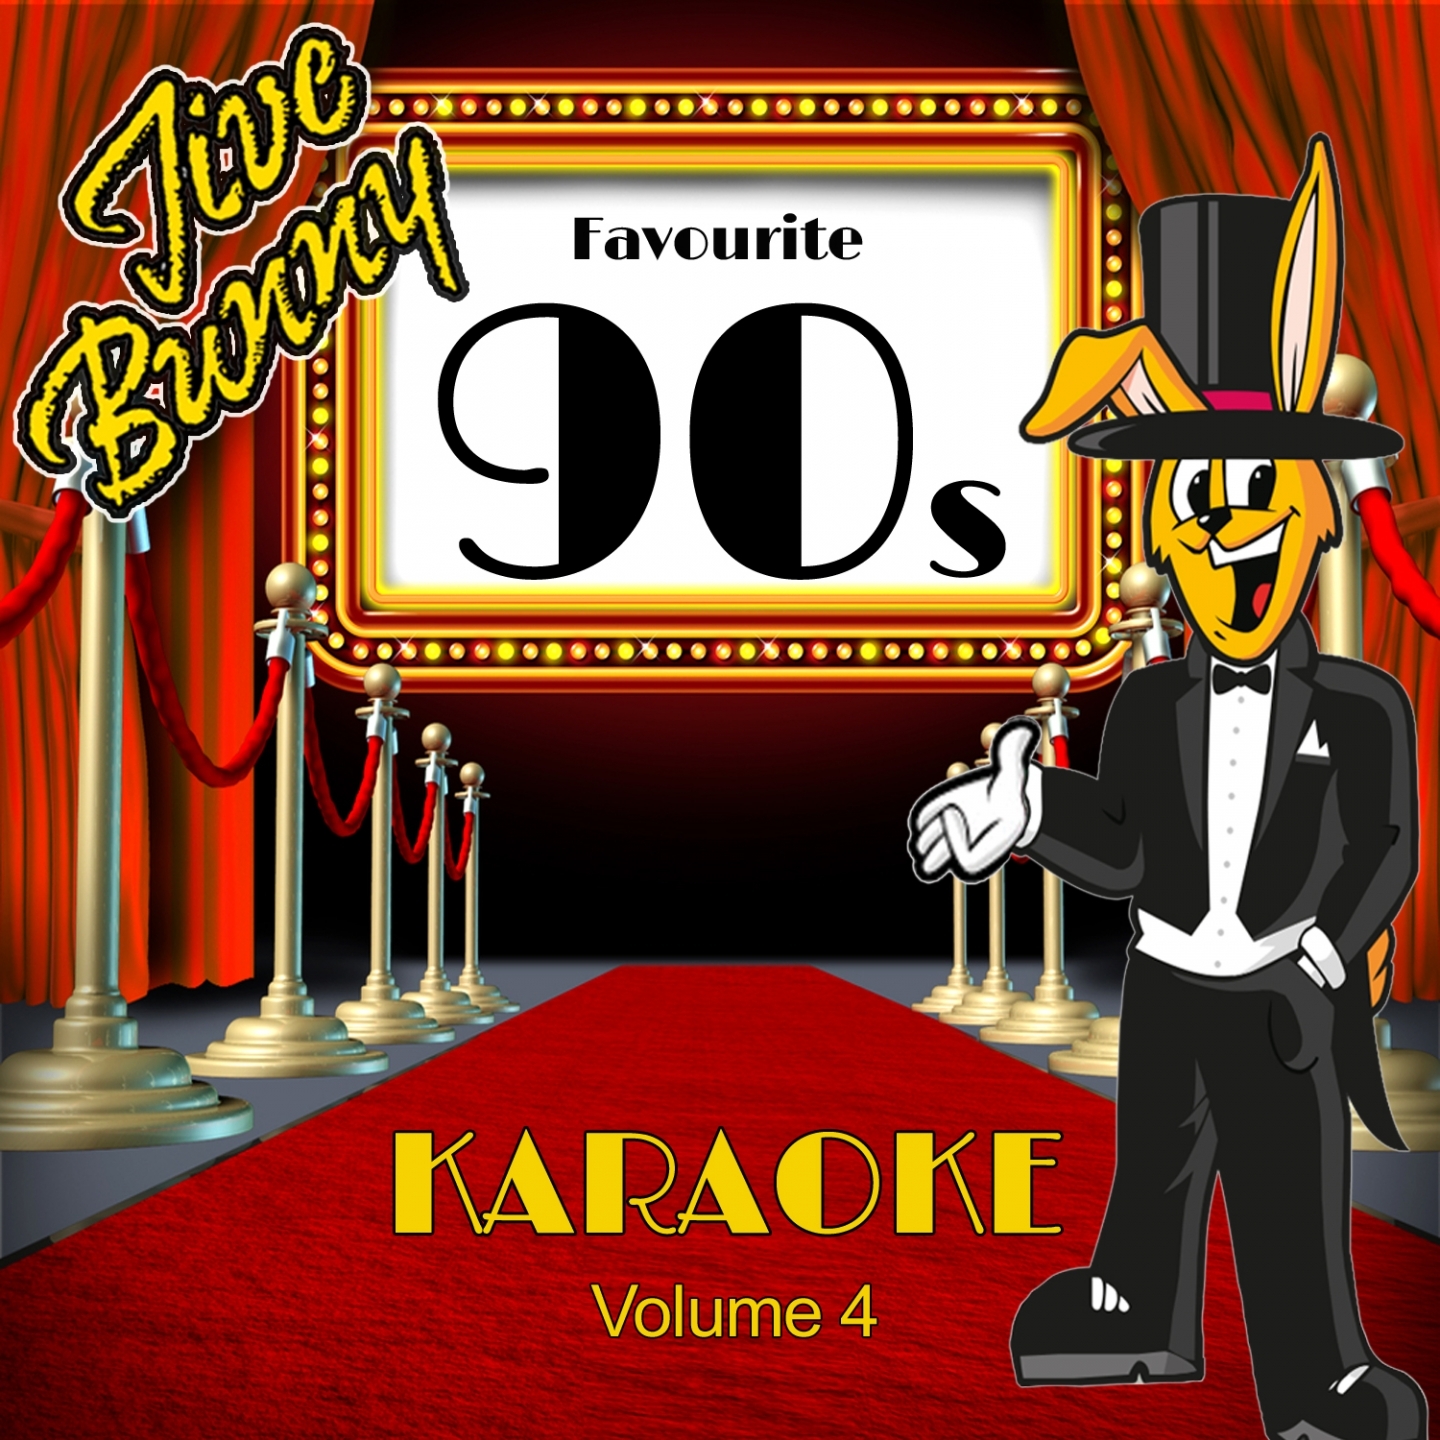 I'll Be There for You (Karaoke Version) (Originally Performed By the Rembrandts)